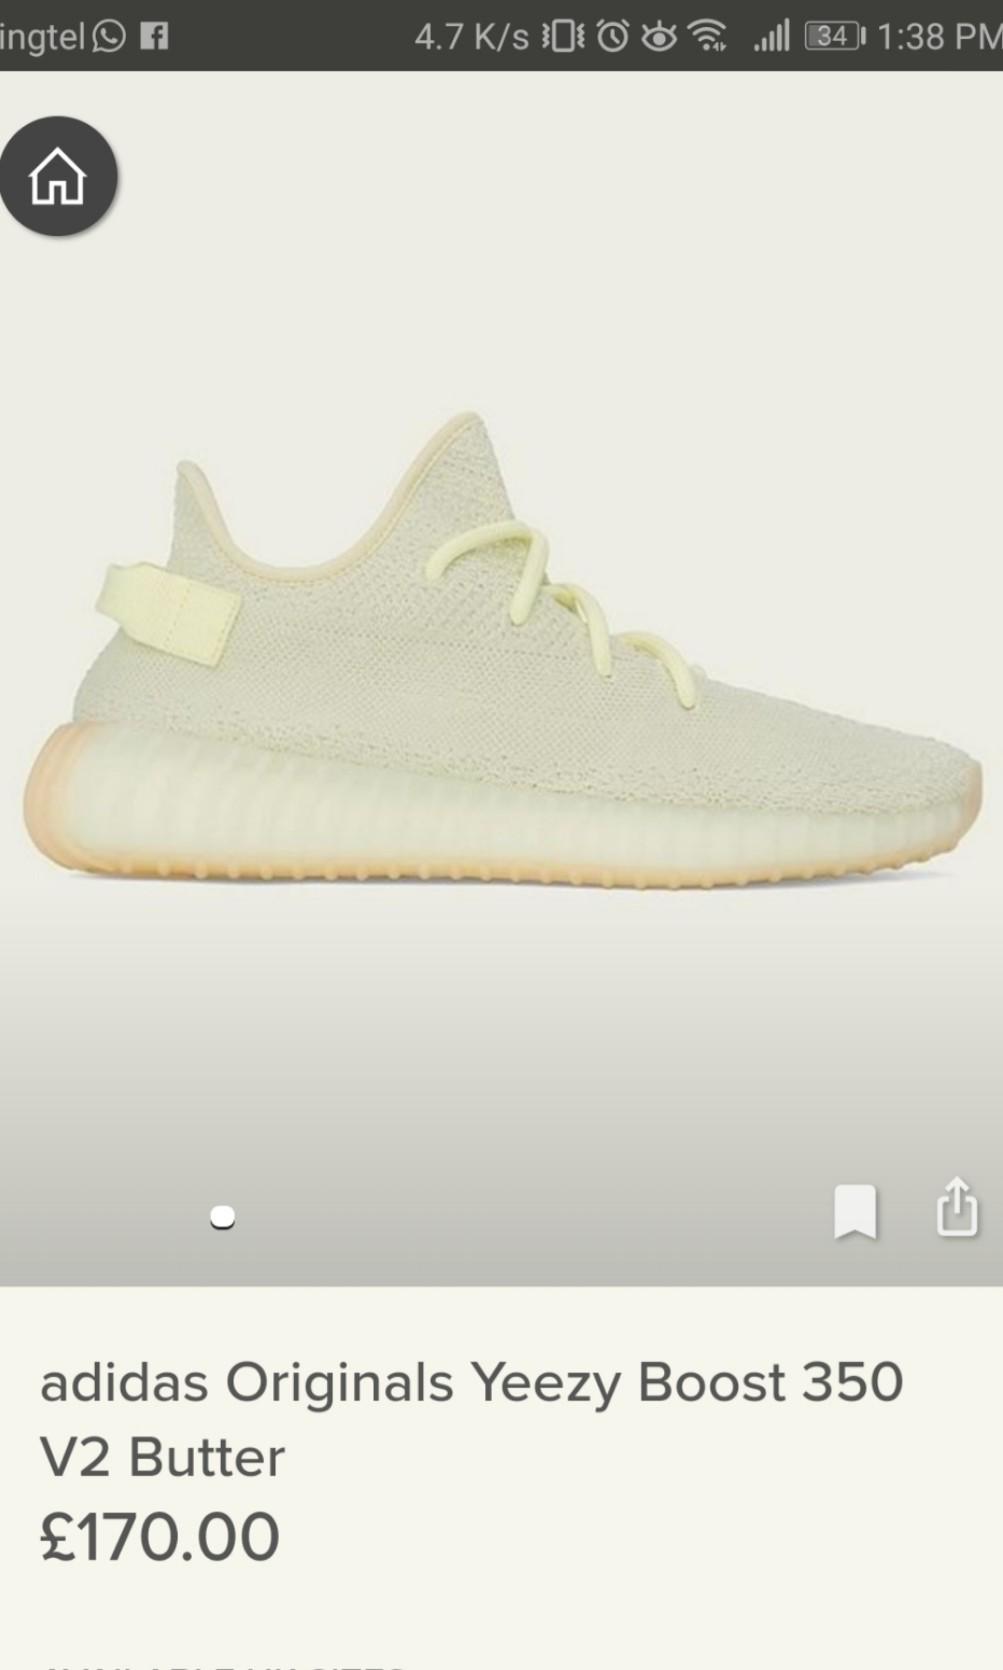 Adidas Originals Yeezy Boost 350 V2 Butter Men S Fashion Footwear Sneakers On Carousell